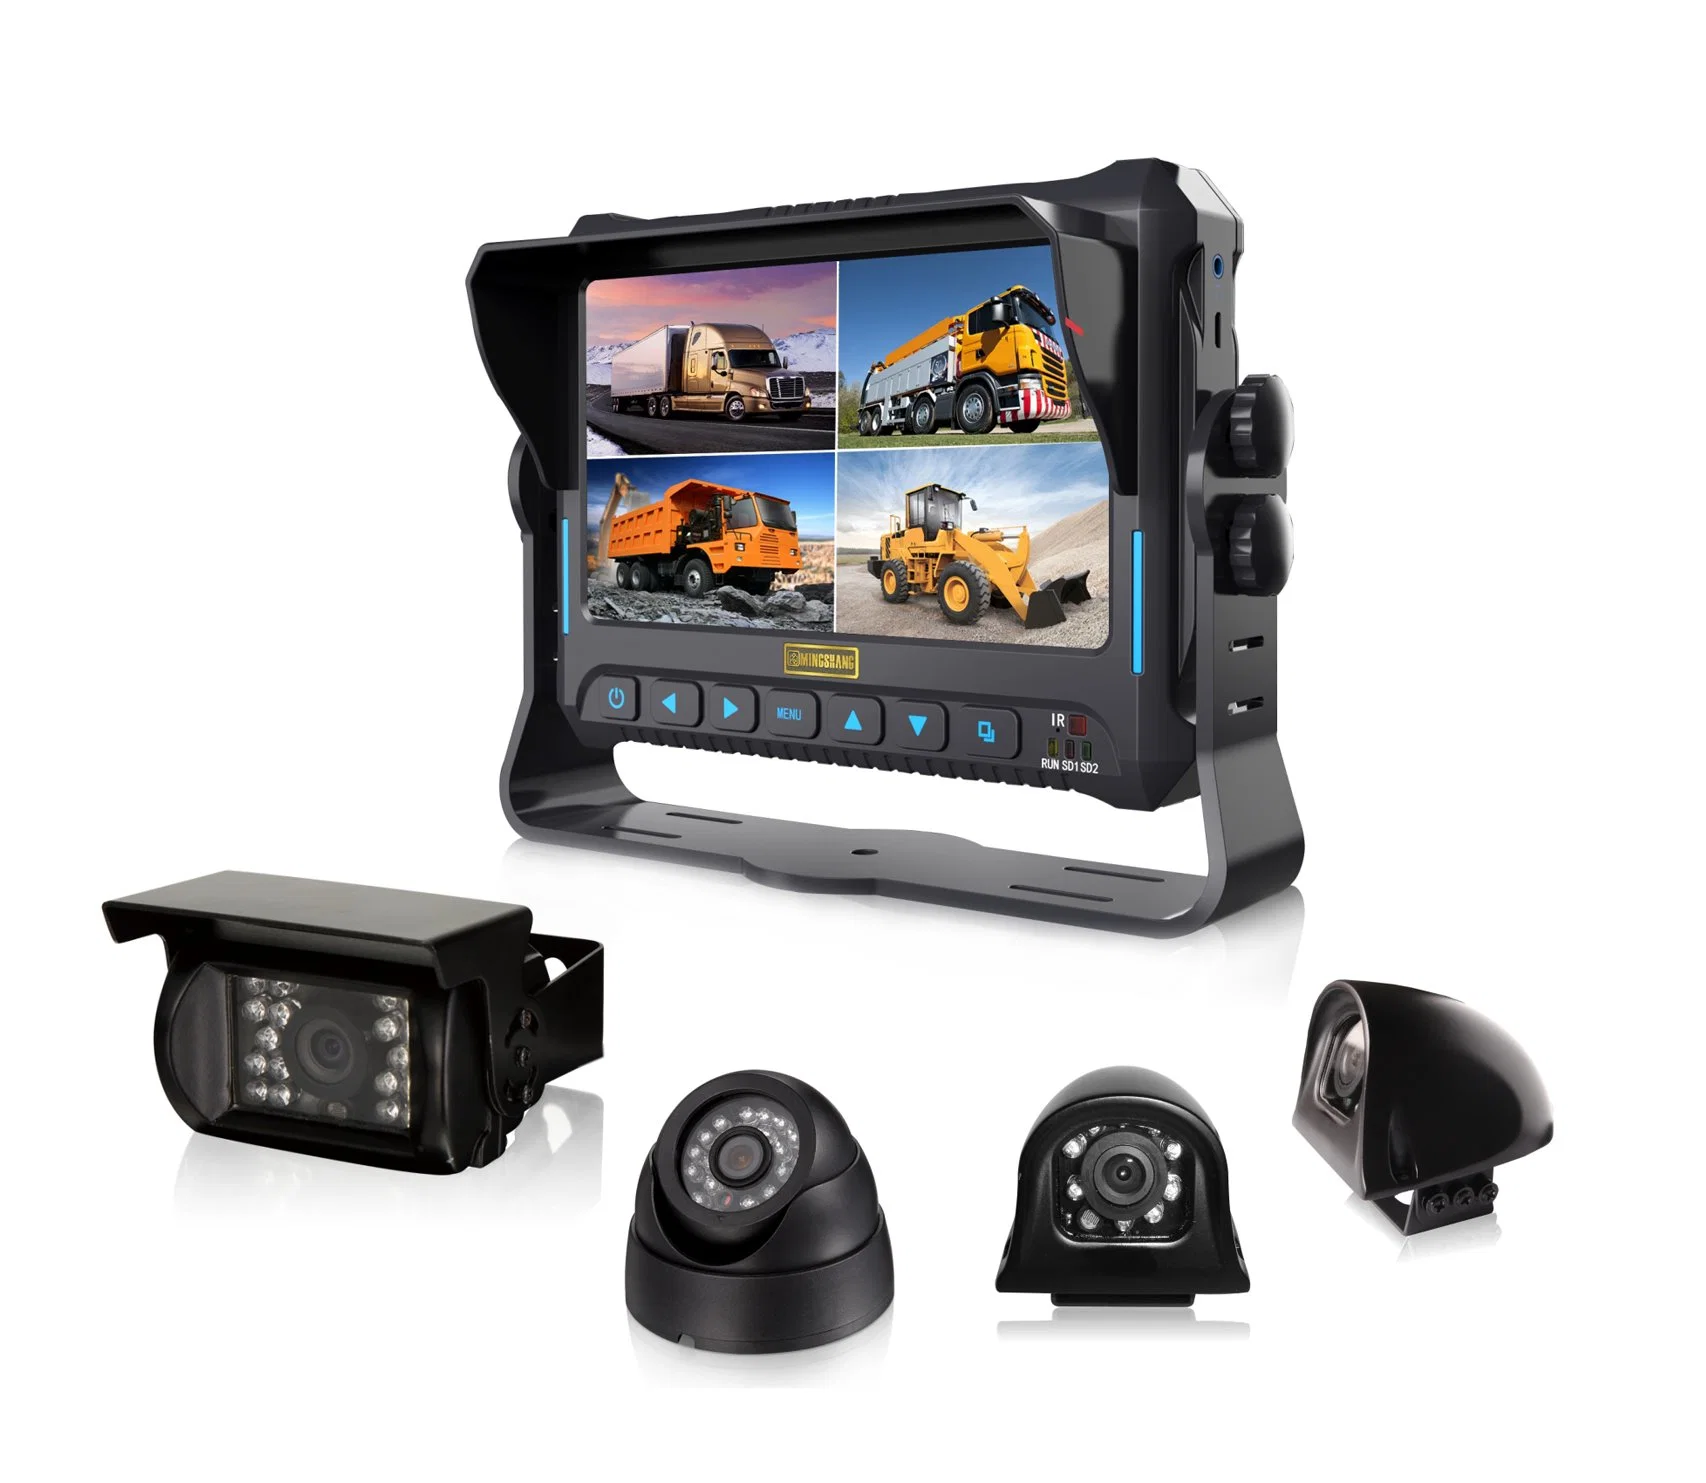 7 Inch Quad Touchscreen Mobile DVR with 4 Channels